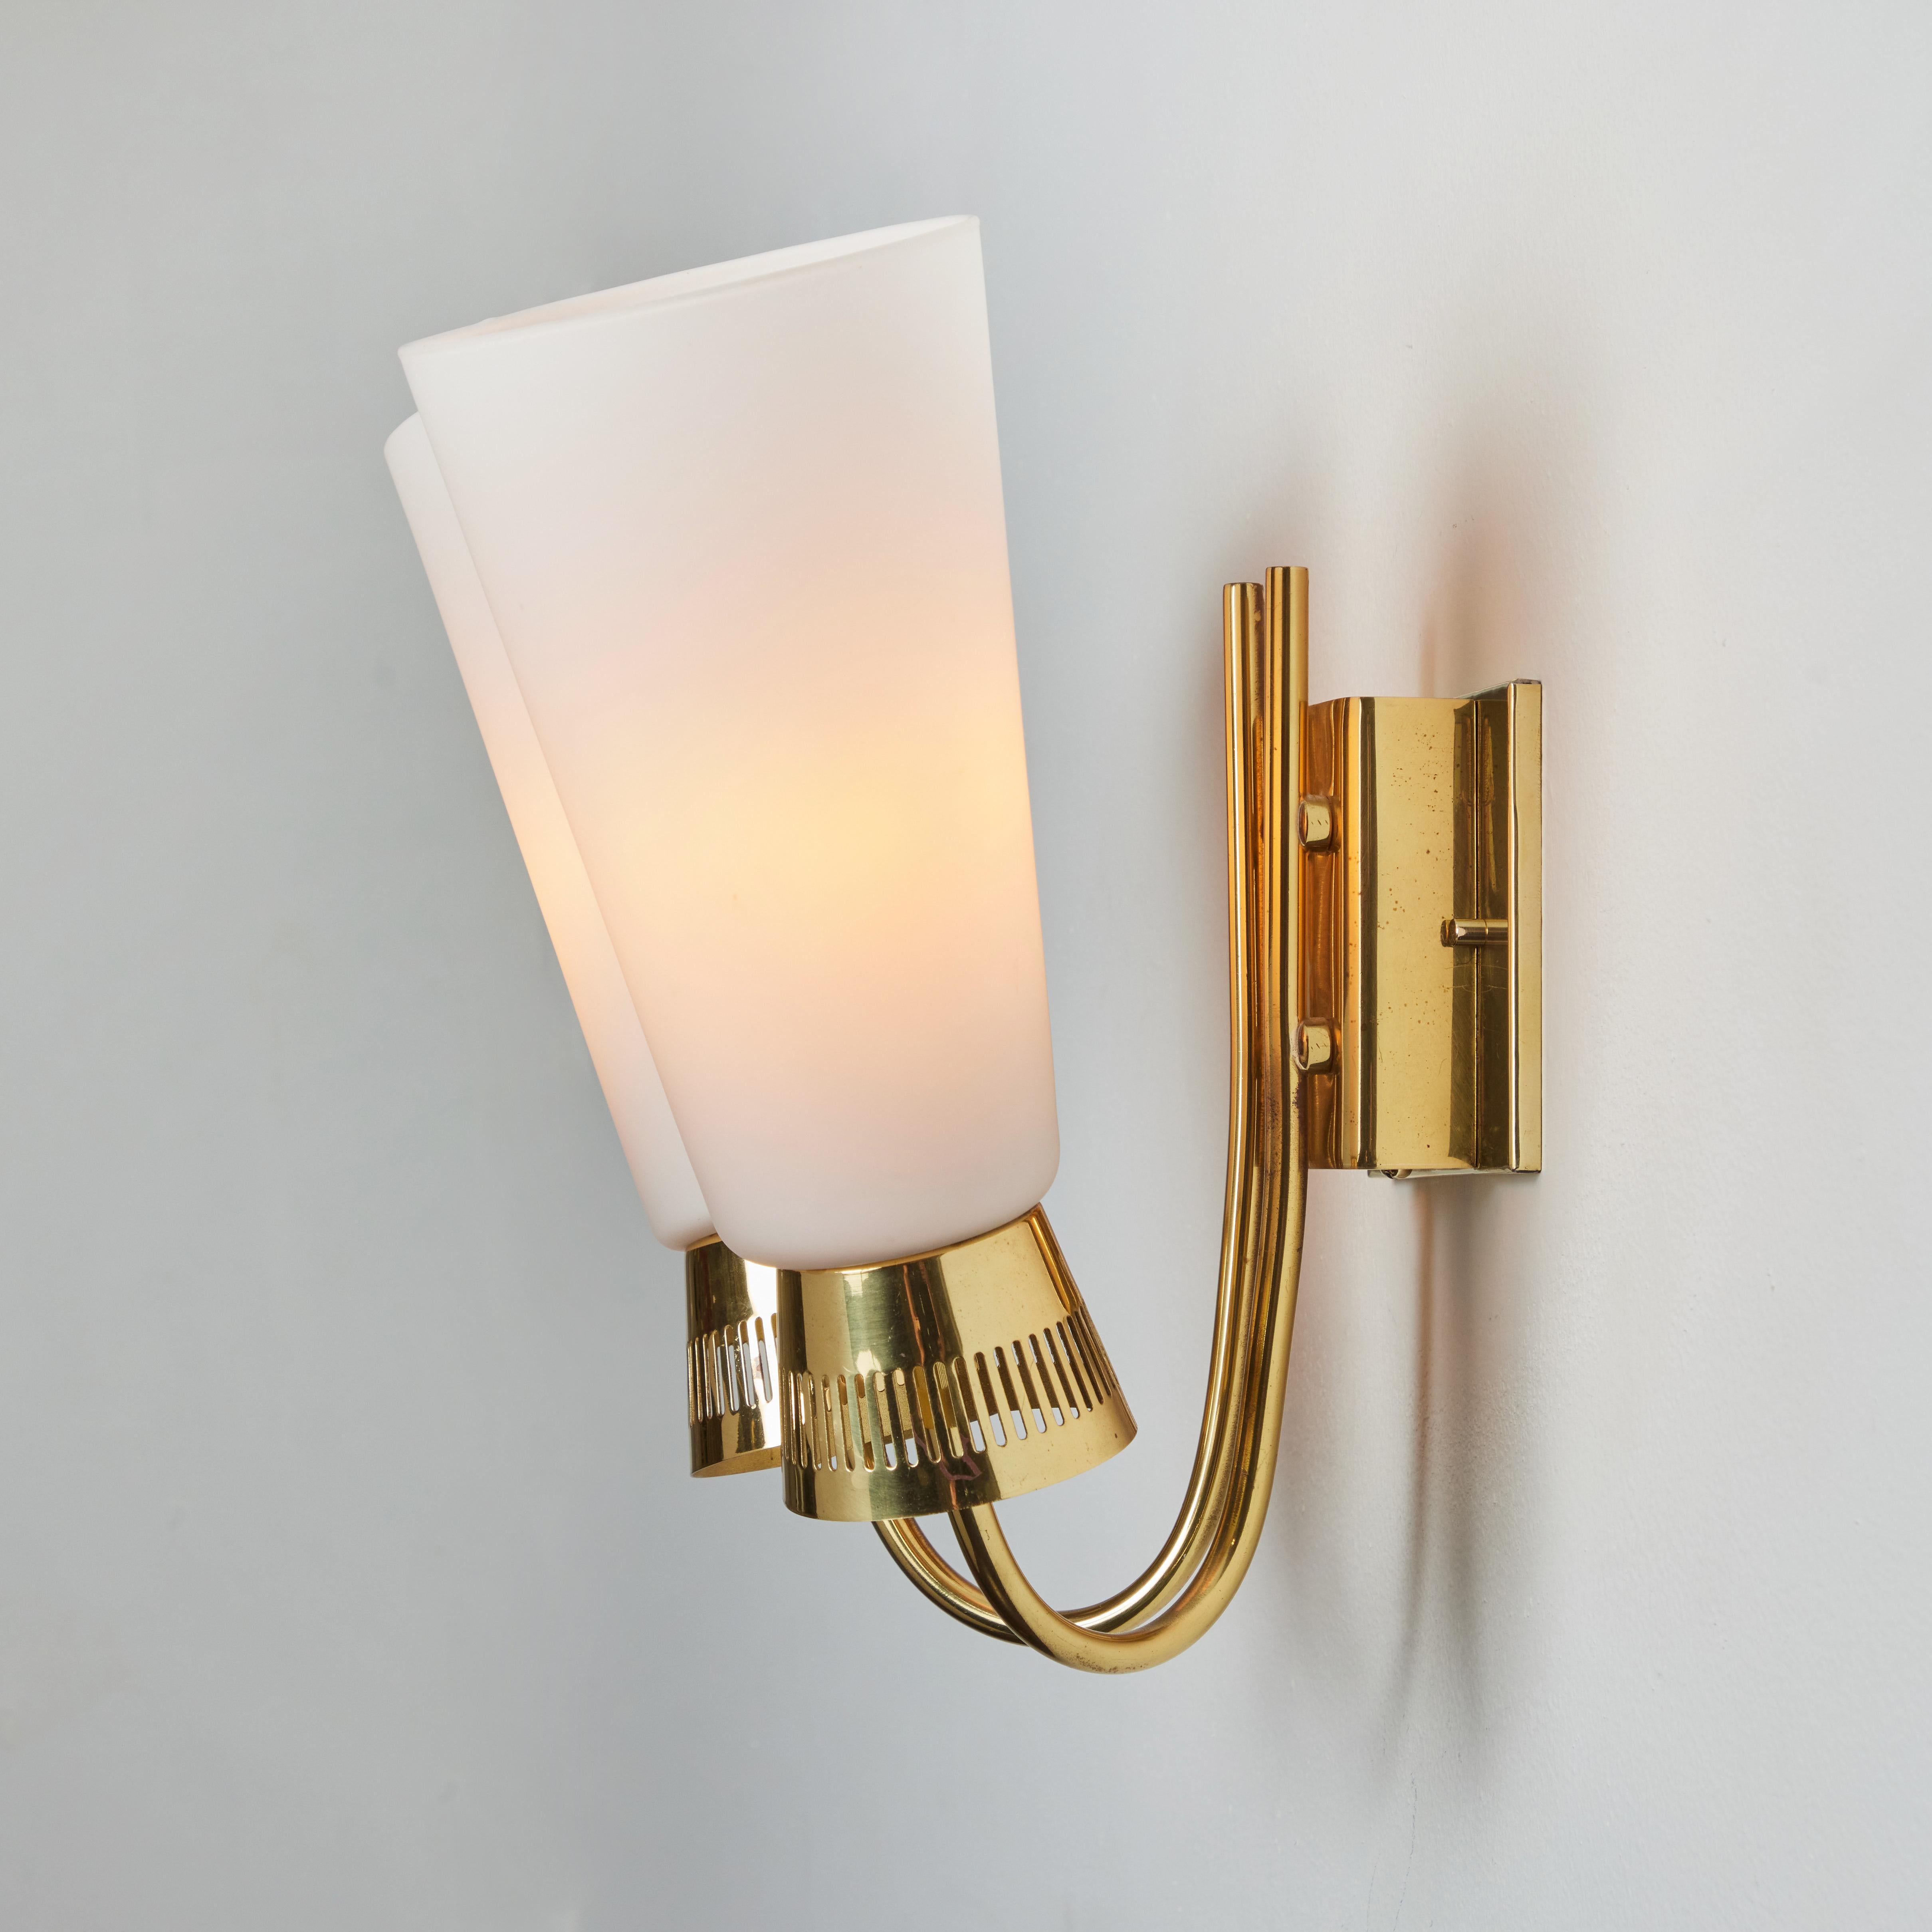 Pair of 1950s Mauri Almari Model #EY60 Brass & Glass Double Sconces for Itsu For Sale 5